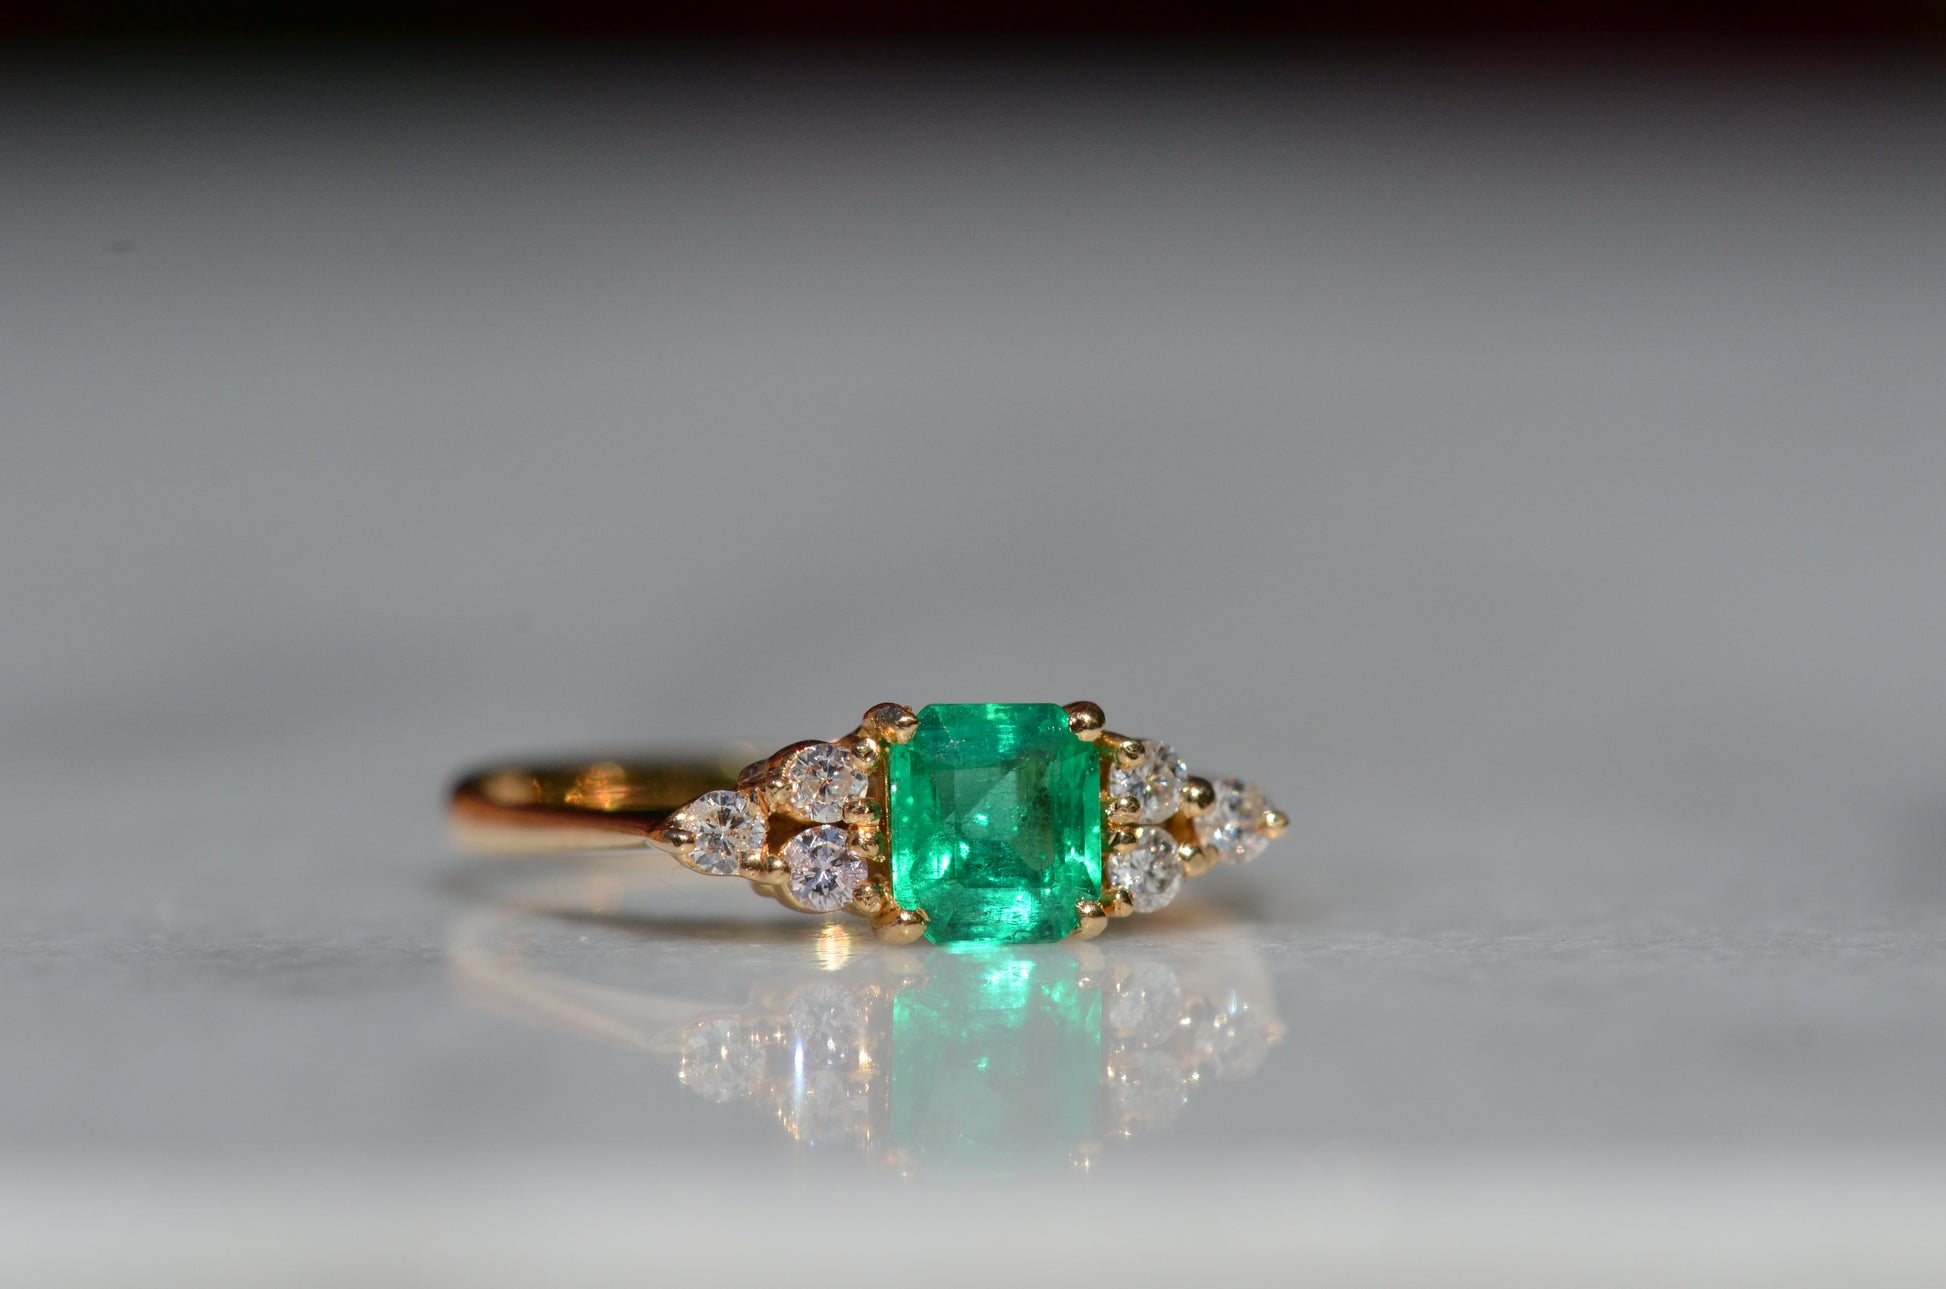 Close-cropped macro of a vintage ring, featuring a square emerald-cut emerald flanked by three round diamonds arranged in a triangular cluster on each shoulder. Viewed slightly to the right to highlight the diamond shoulders.